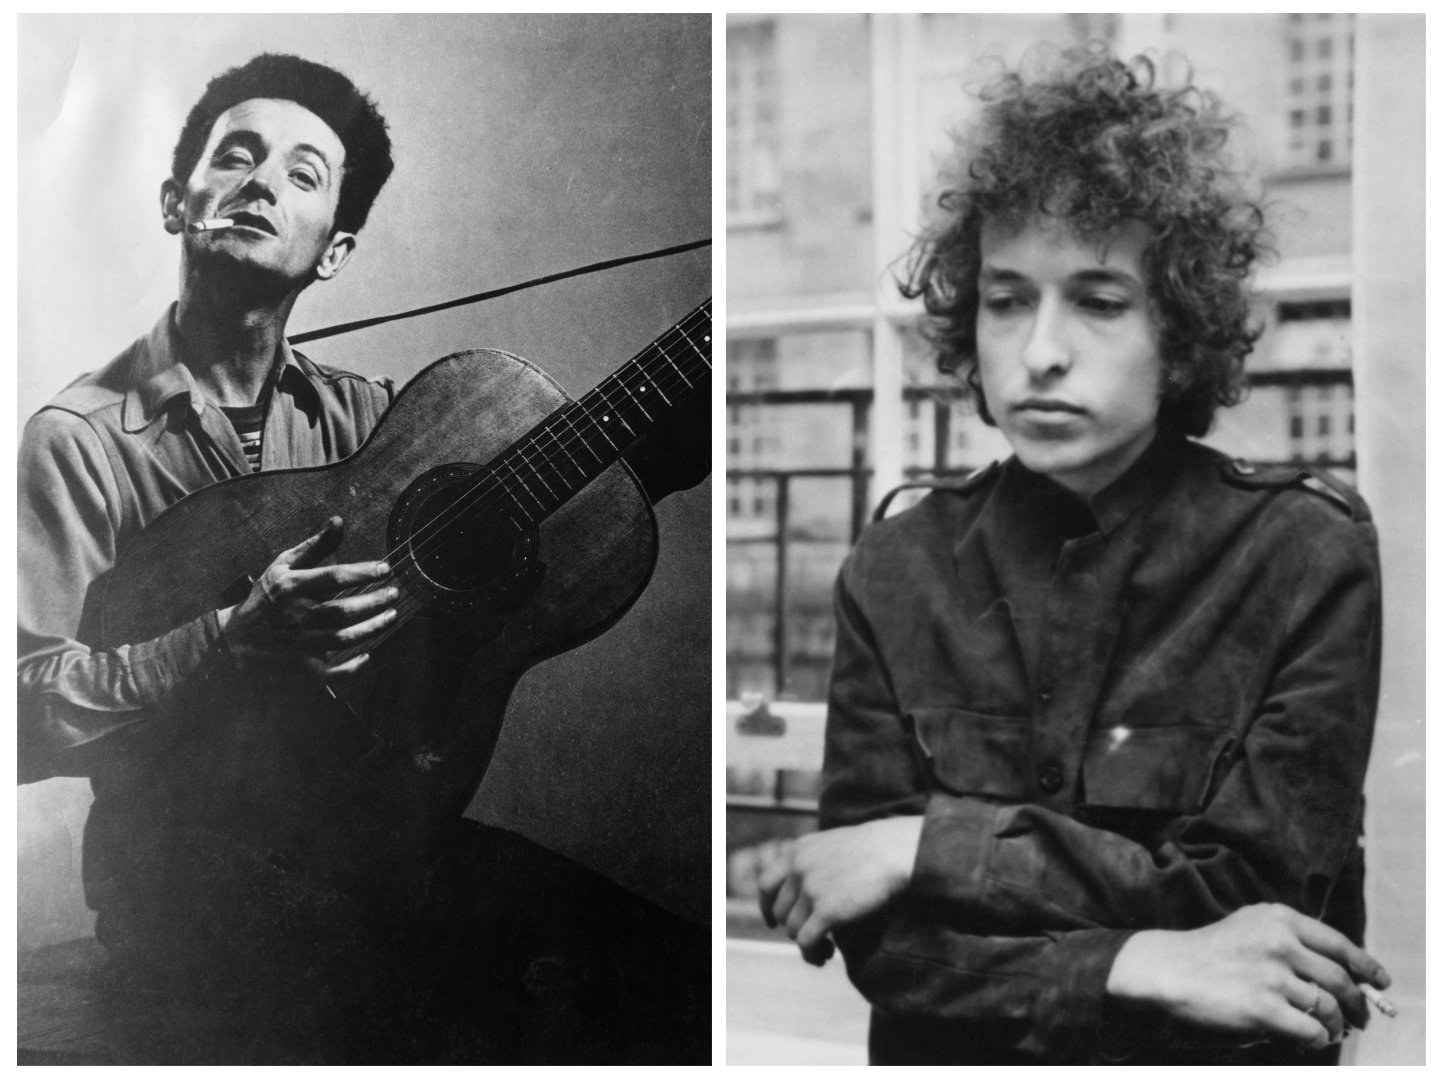 A black and white picture of Woody Guthrie holding a guitar. Bob Dylan holds a cigarette and leans against a window.